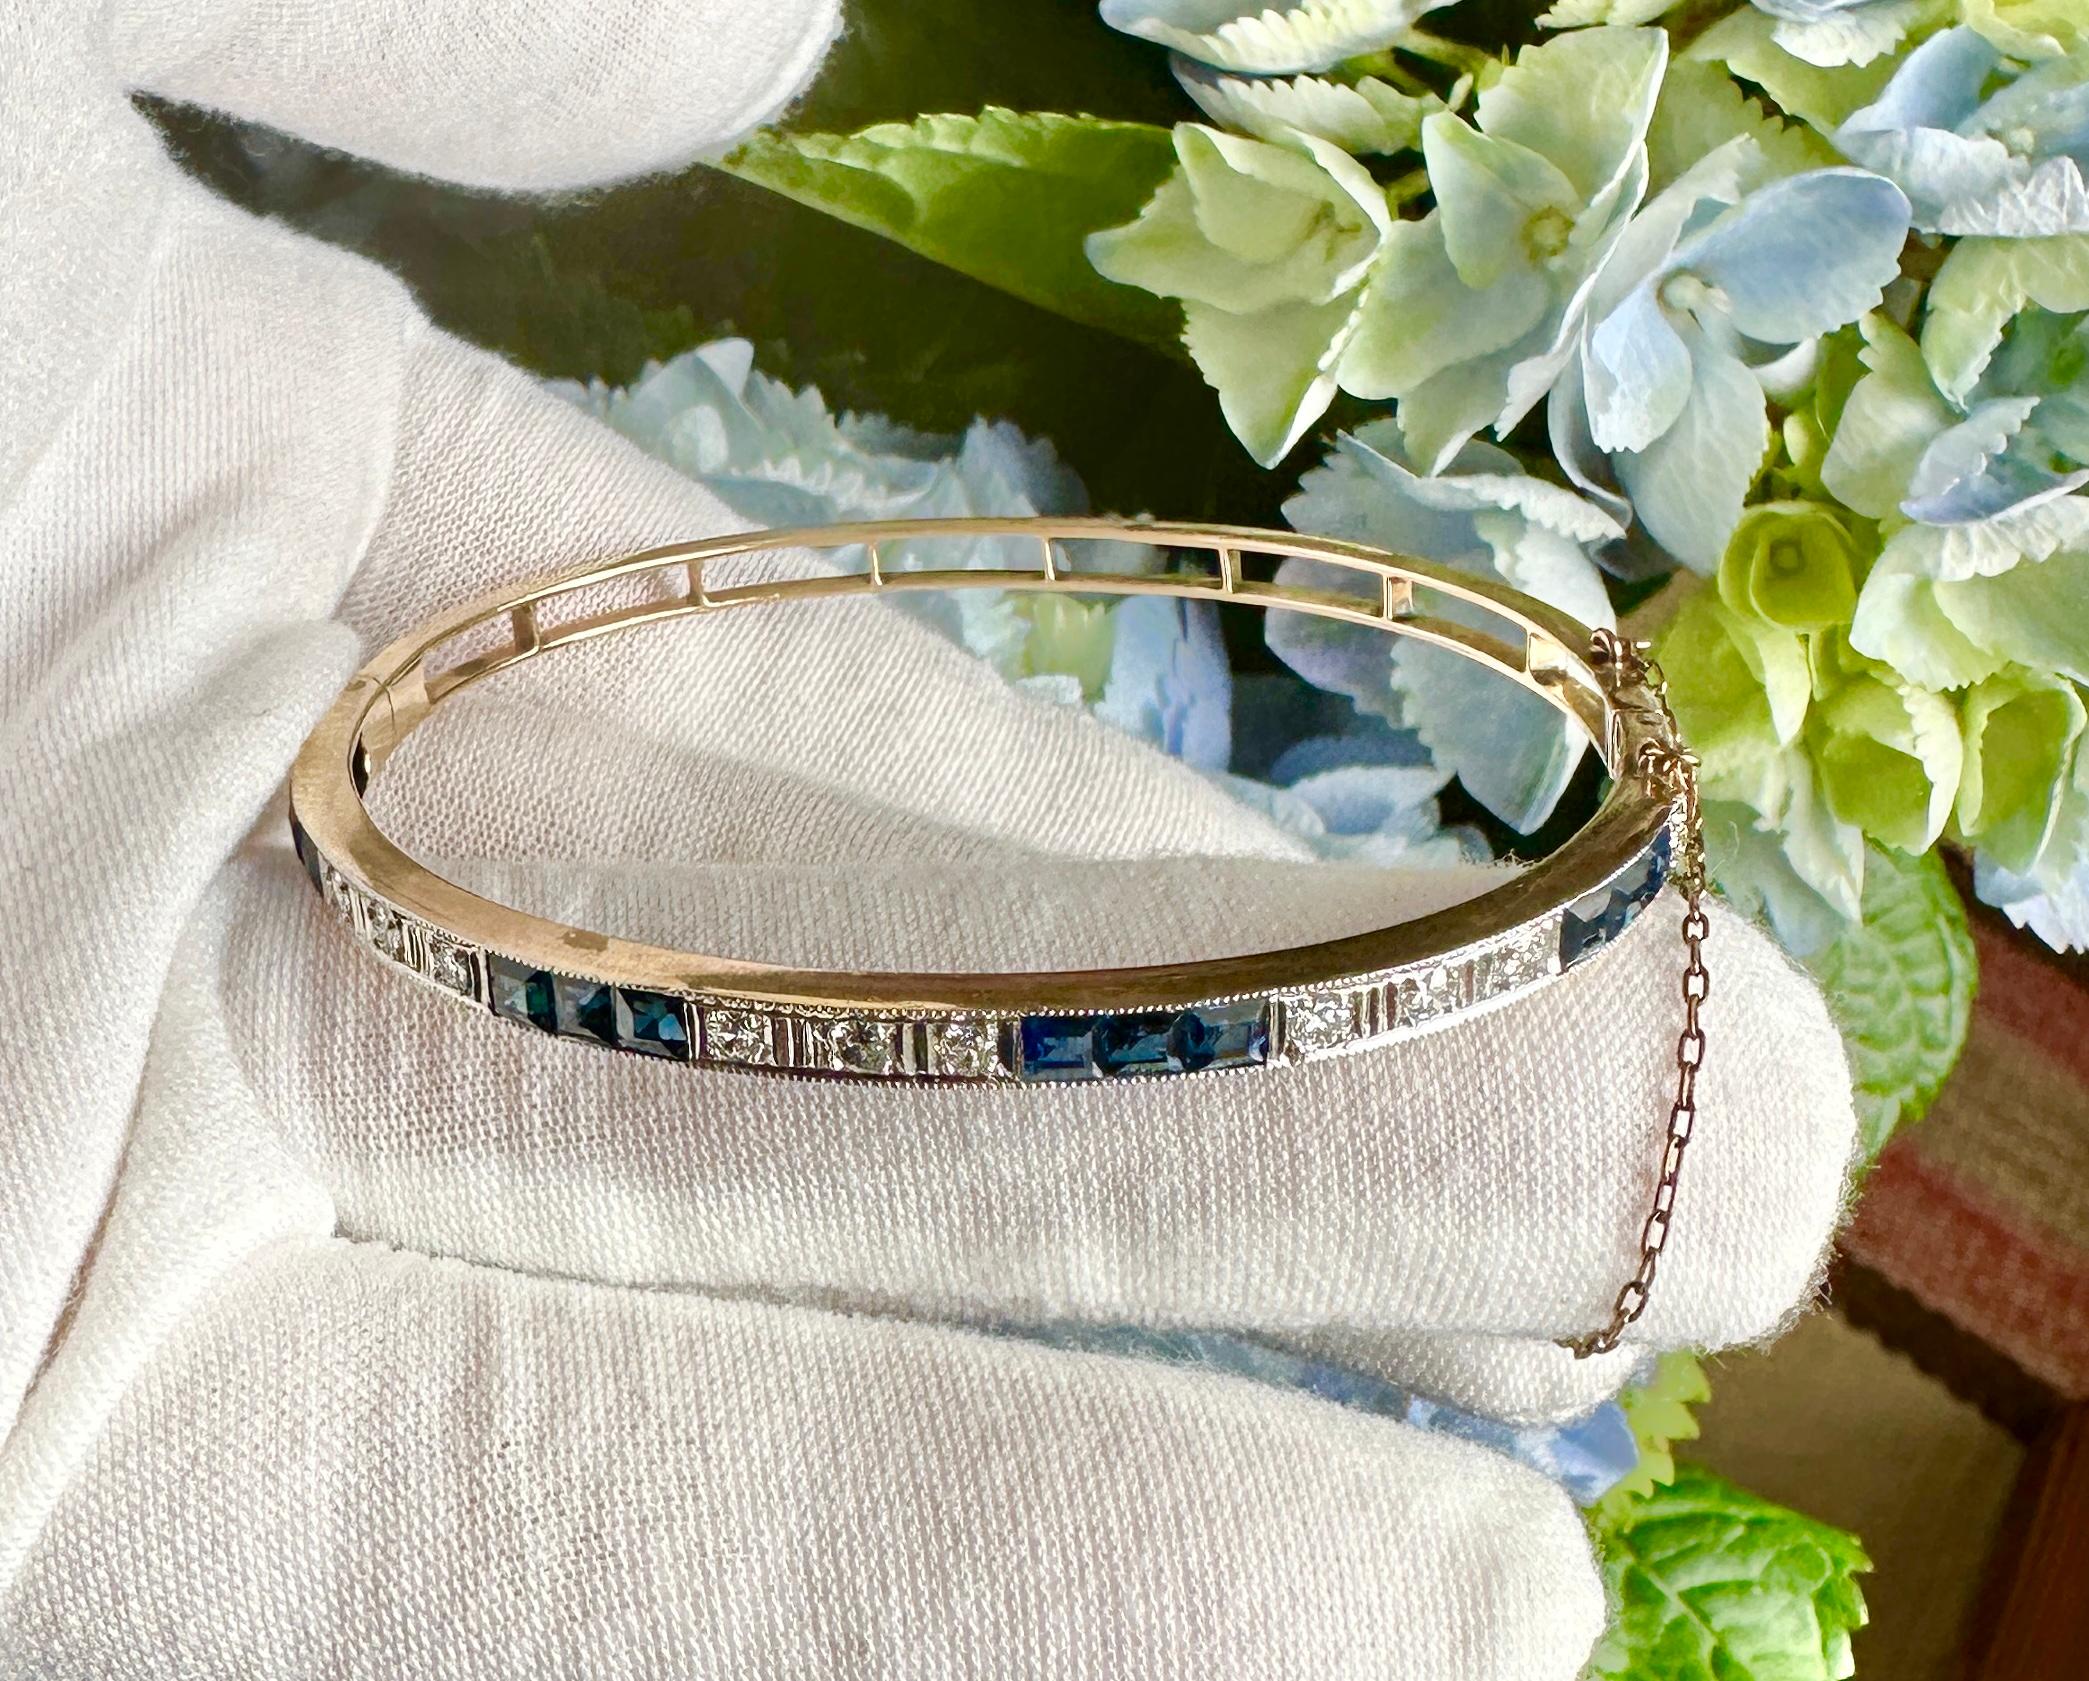 Art Deco Sapphire Old Mine Cut Diamond Bangle Bracelet Antique 14 Karat Gold In Excellent Condition For Sale In New York, NY